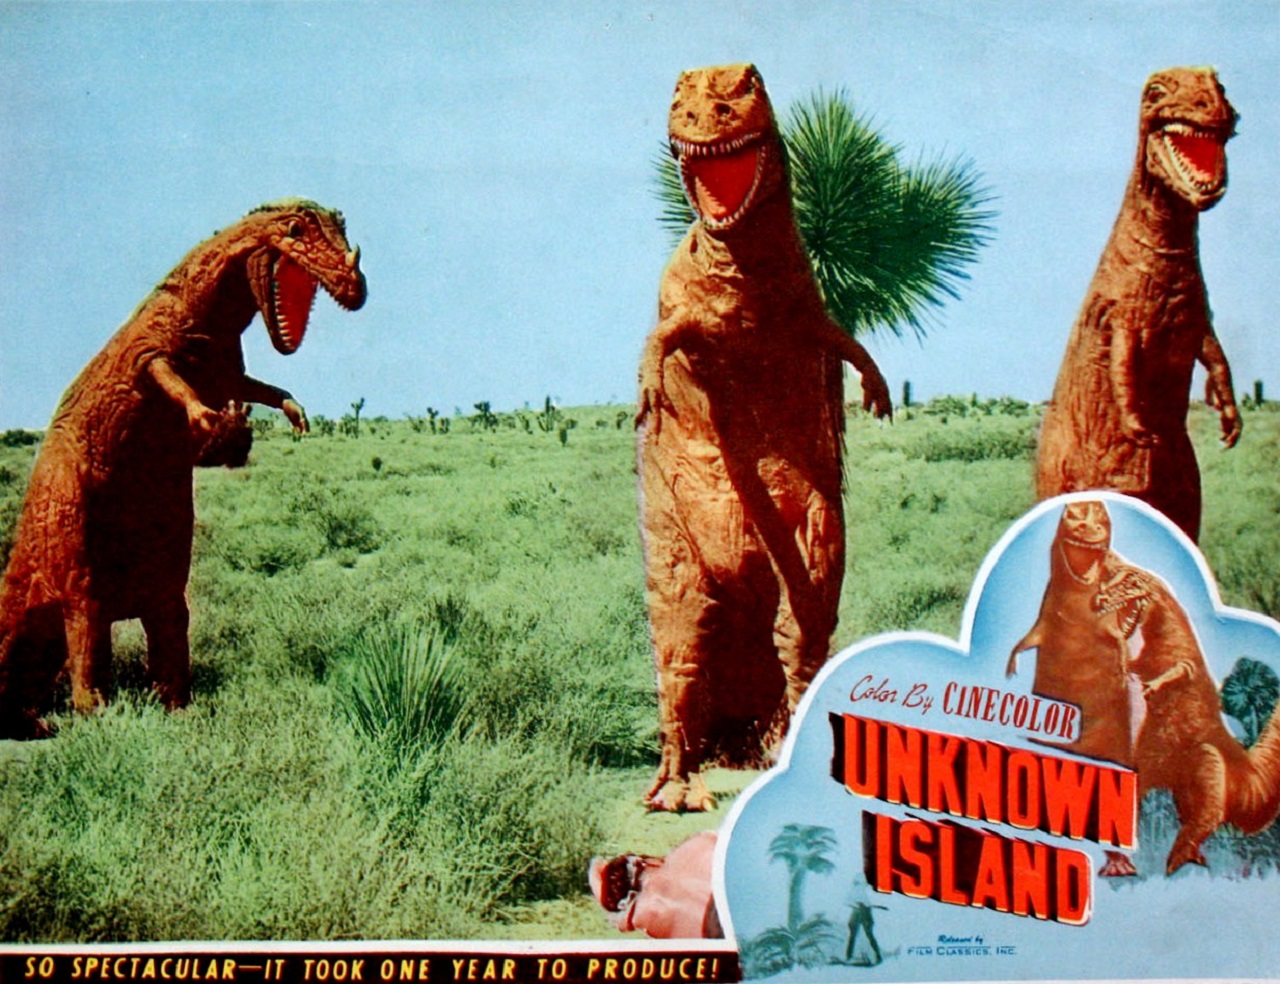 Island of dinosaurs in Unknown Island (1948)